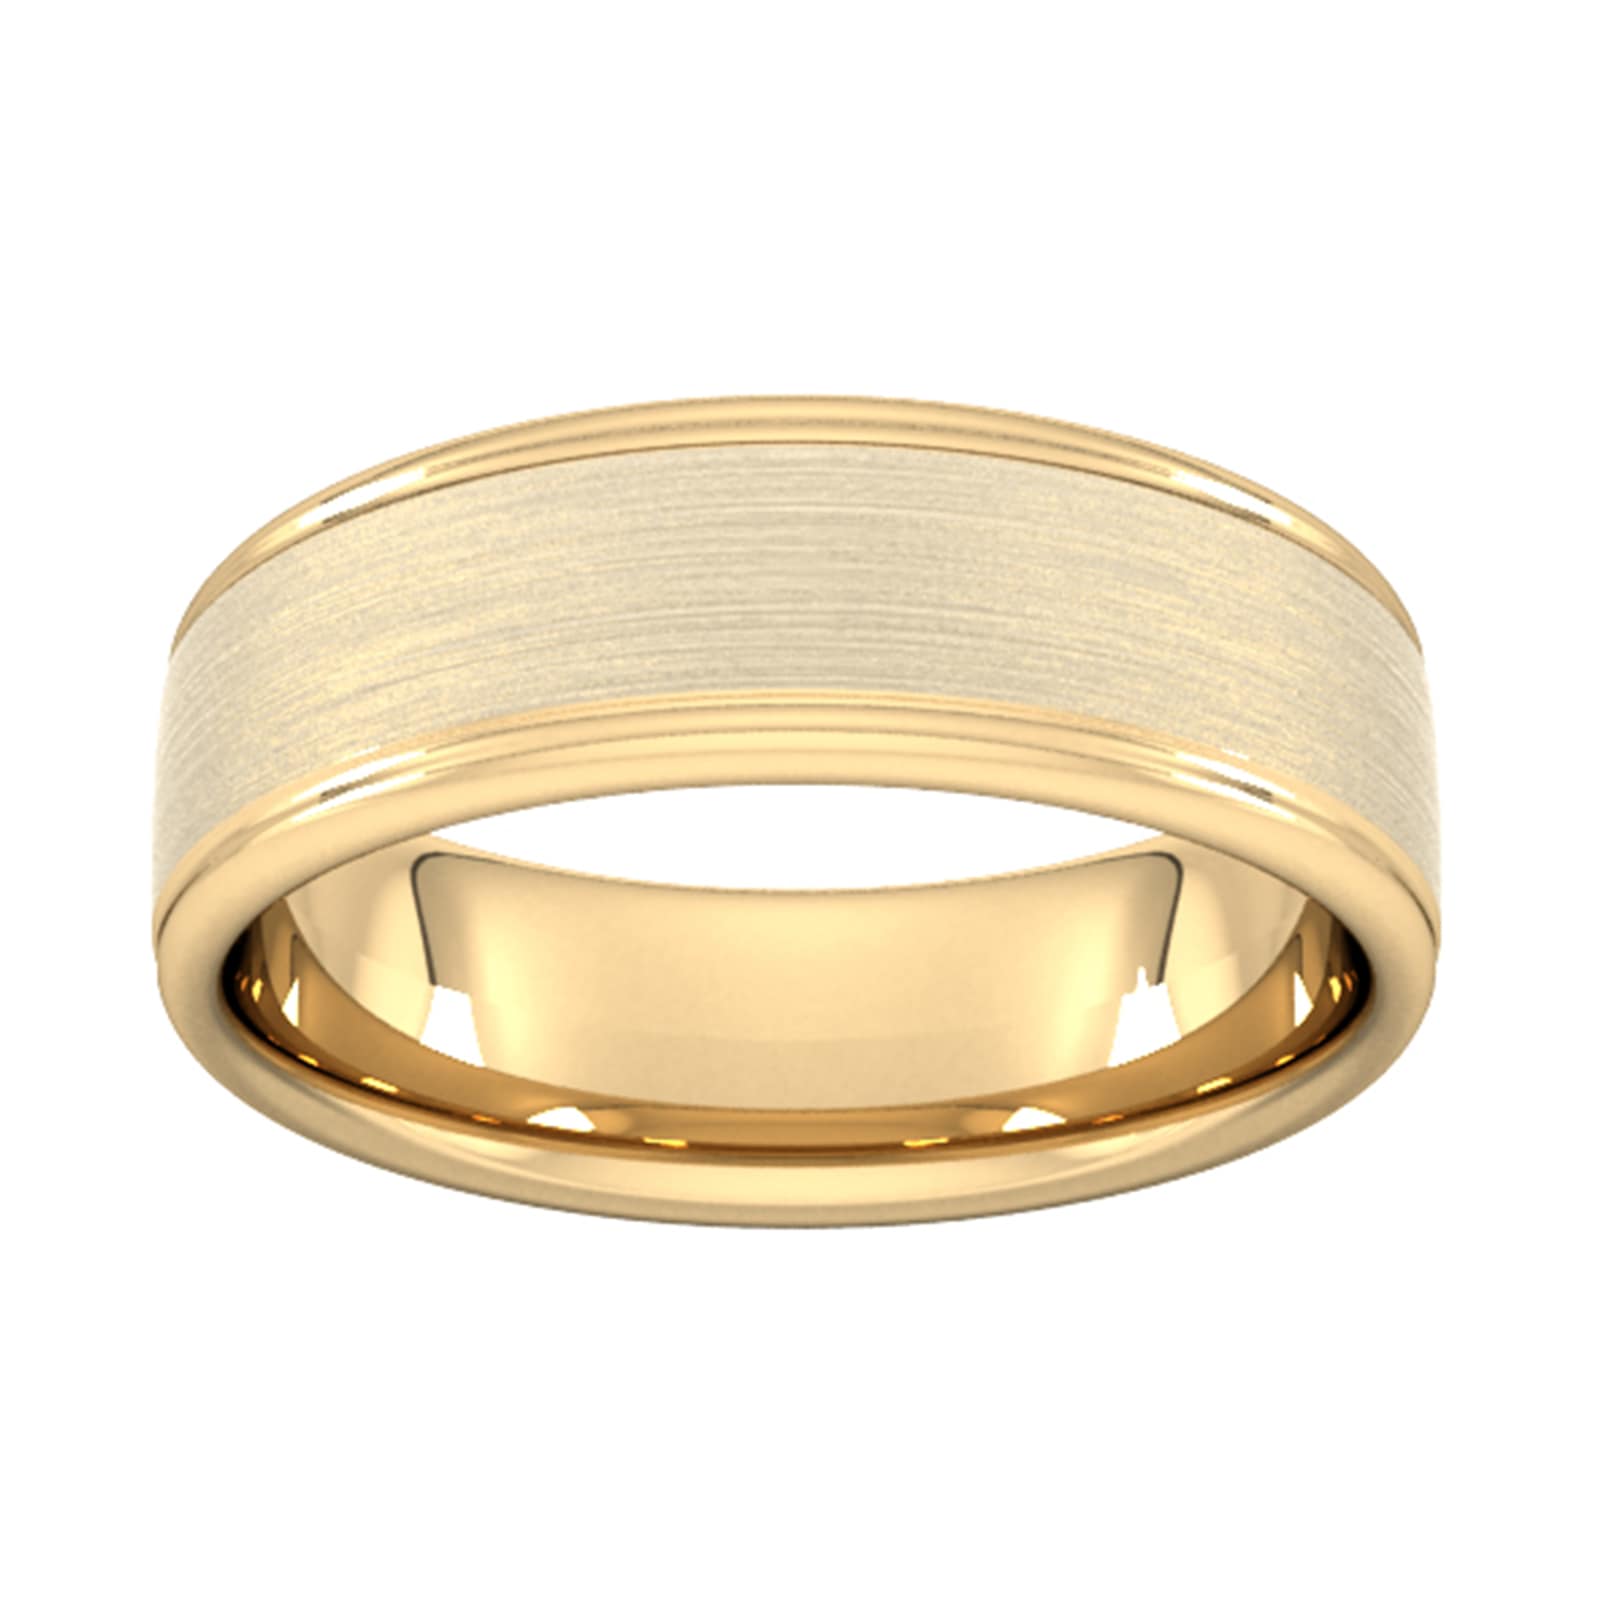 7mm D Shape Heavy Matt Centre With Grooves Wedding Ring In 18 Carat Yellow Gold - Ring Size Y